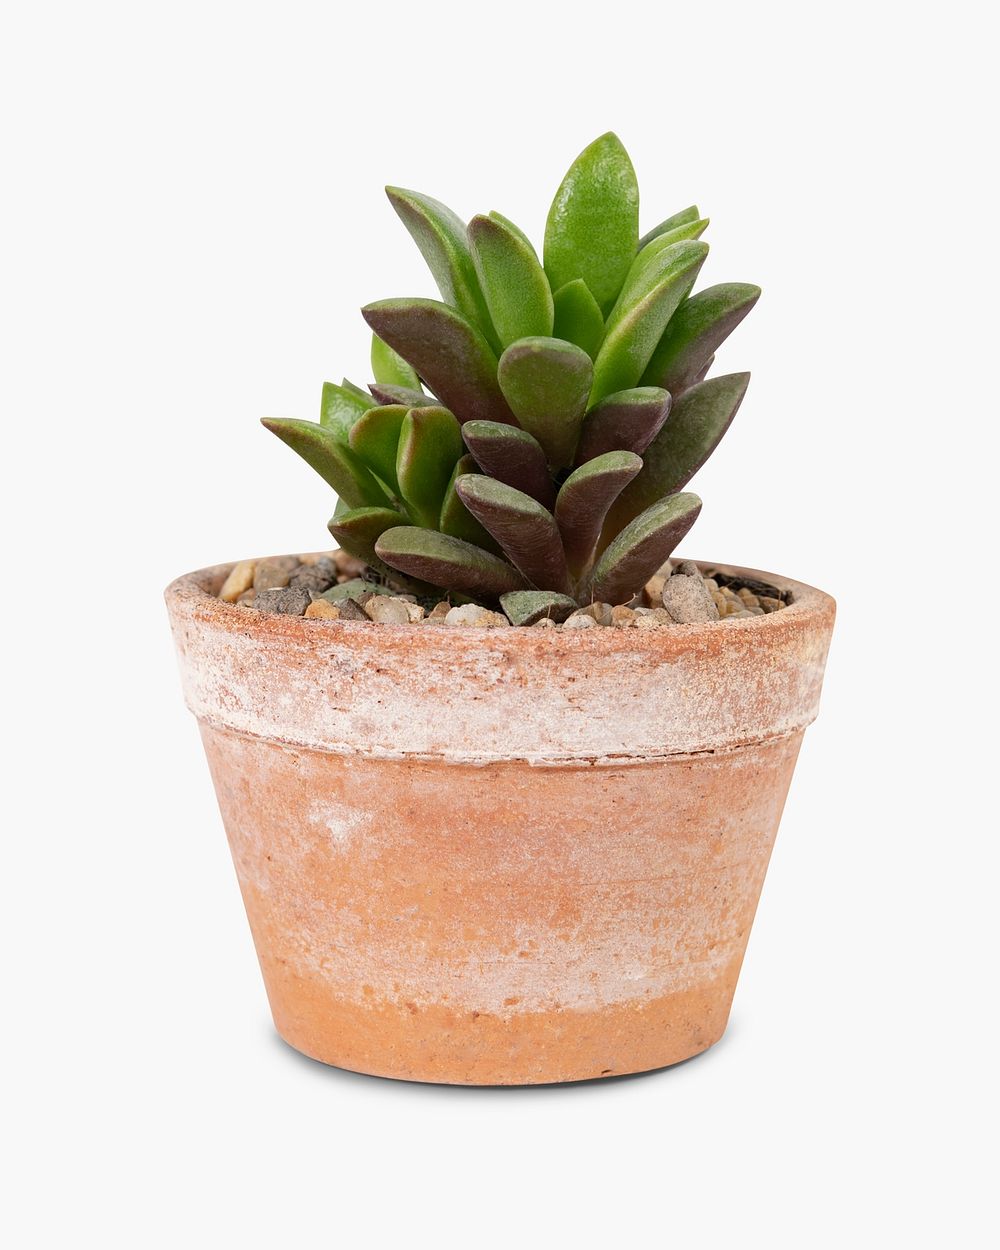 Succulent plant psd mockup in a terracotta pot home decor object